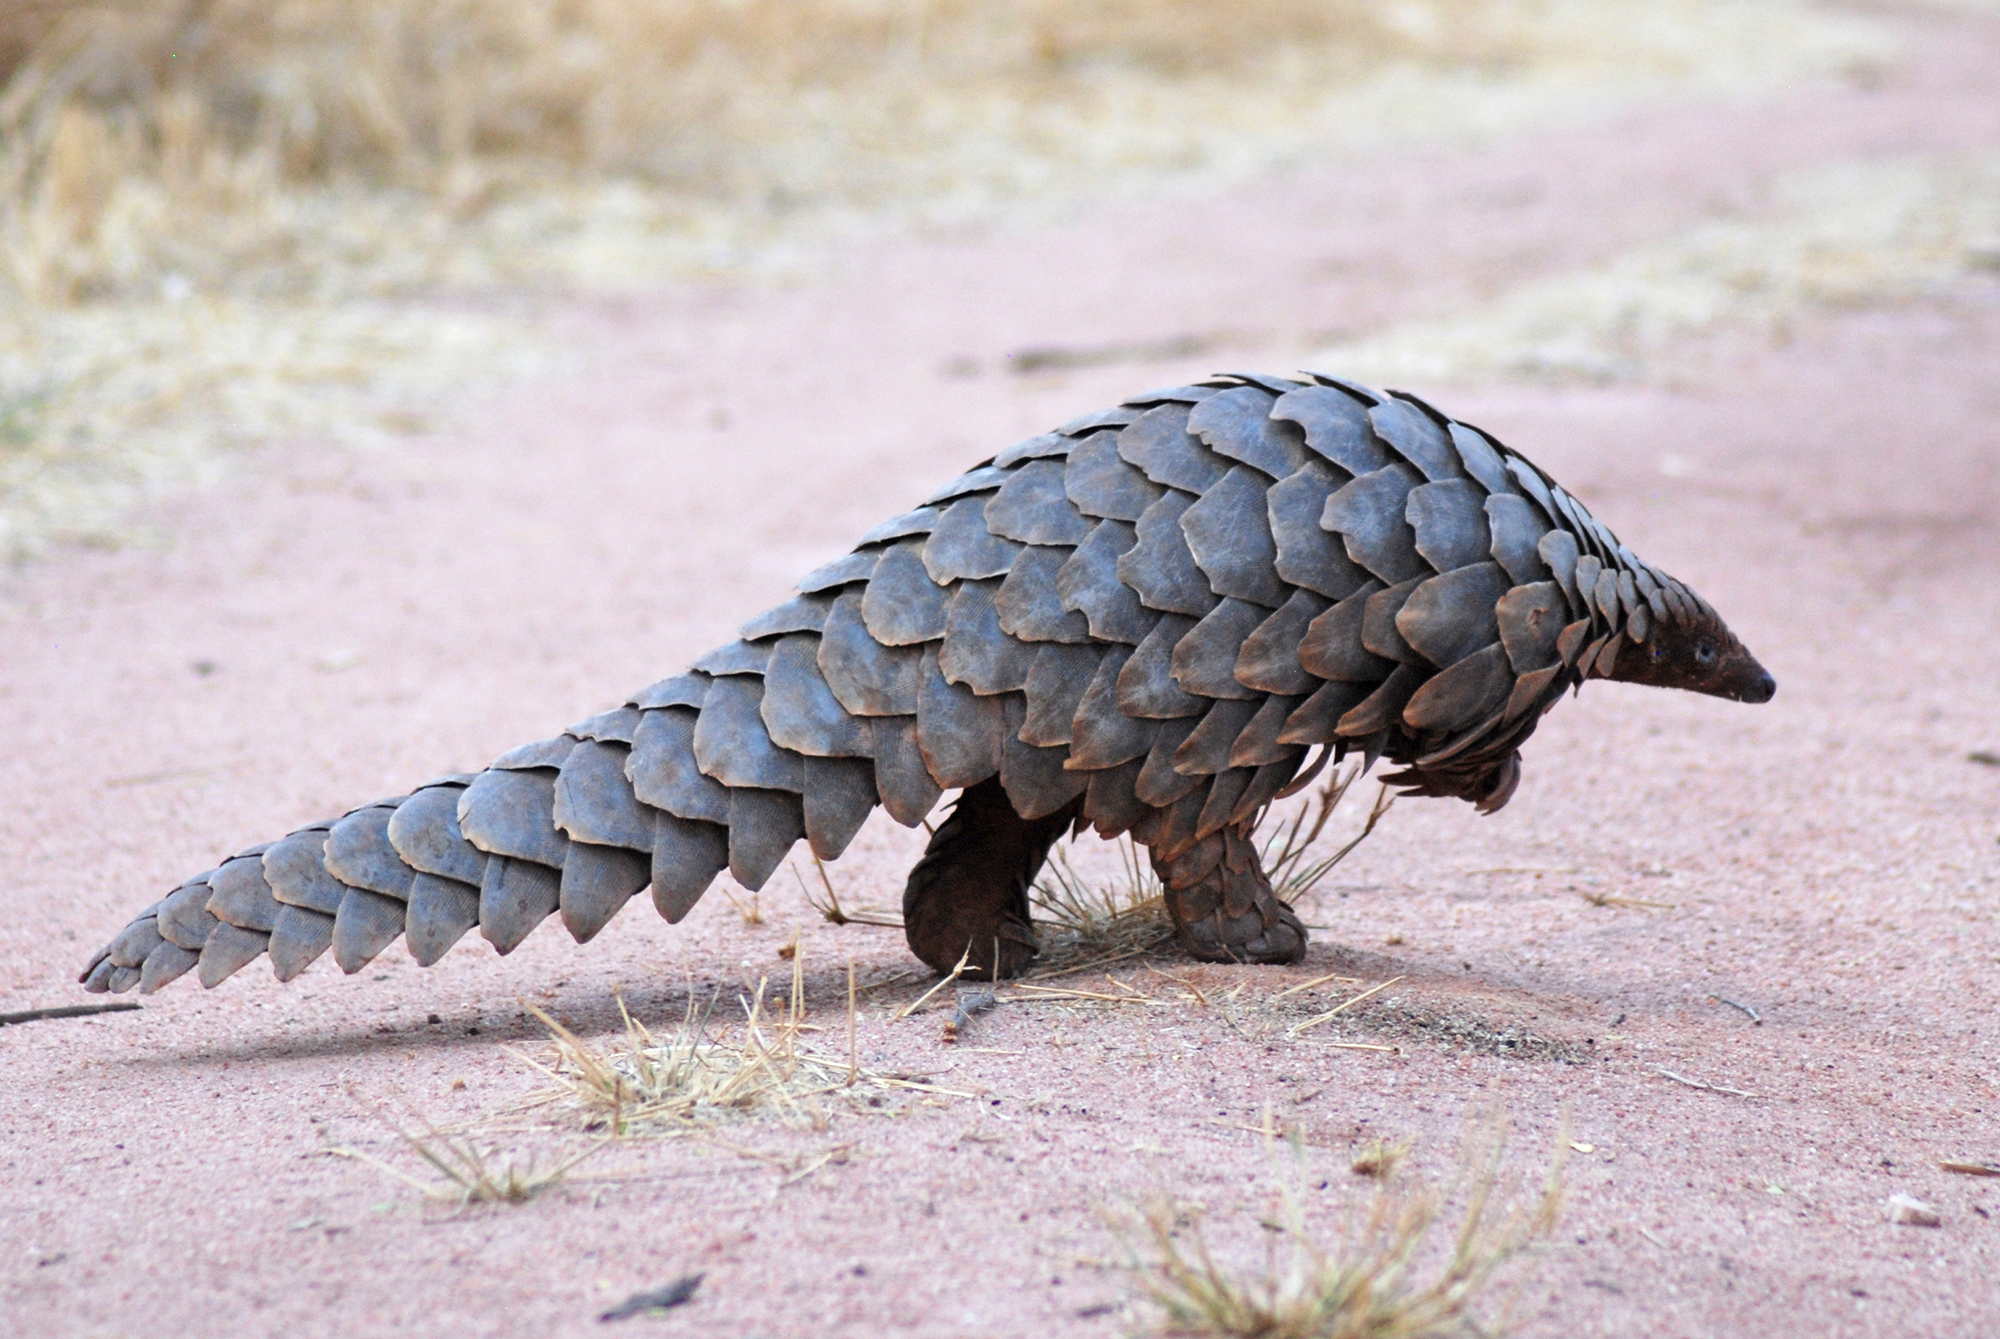 Is the keratin in a pangolin’s scales as durable as our fingernails? -Hannah | 'Q ...2000 x 1339